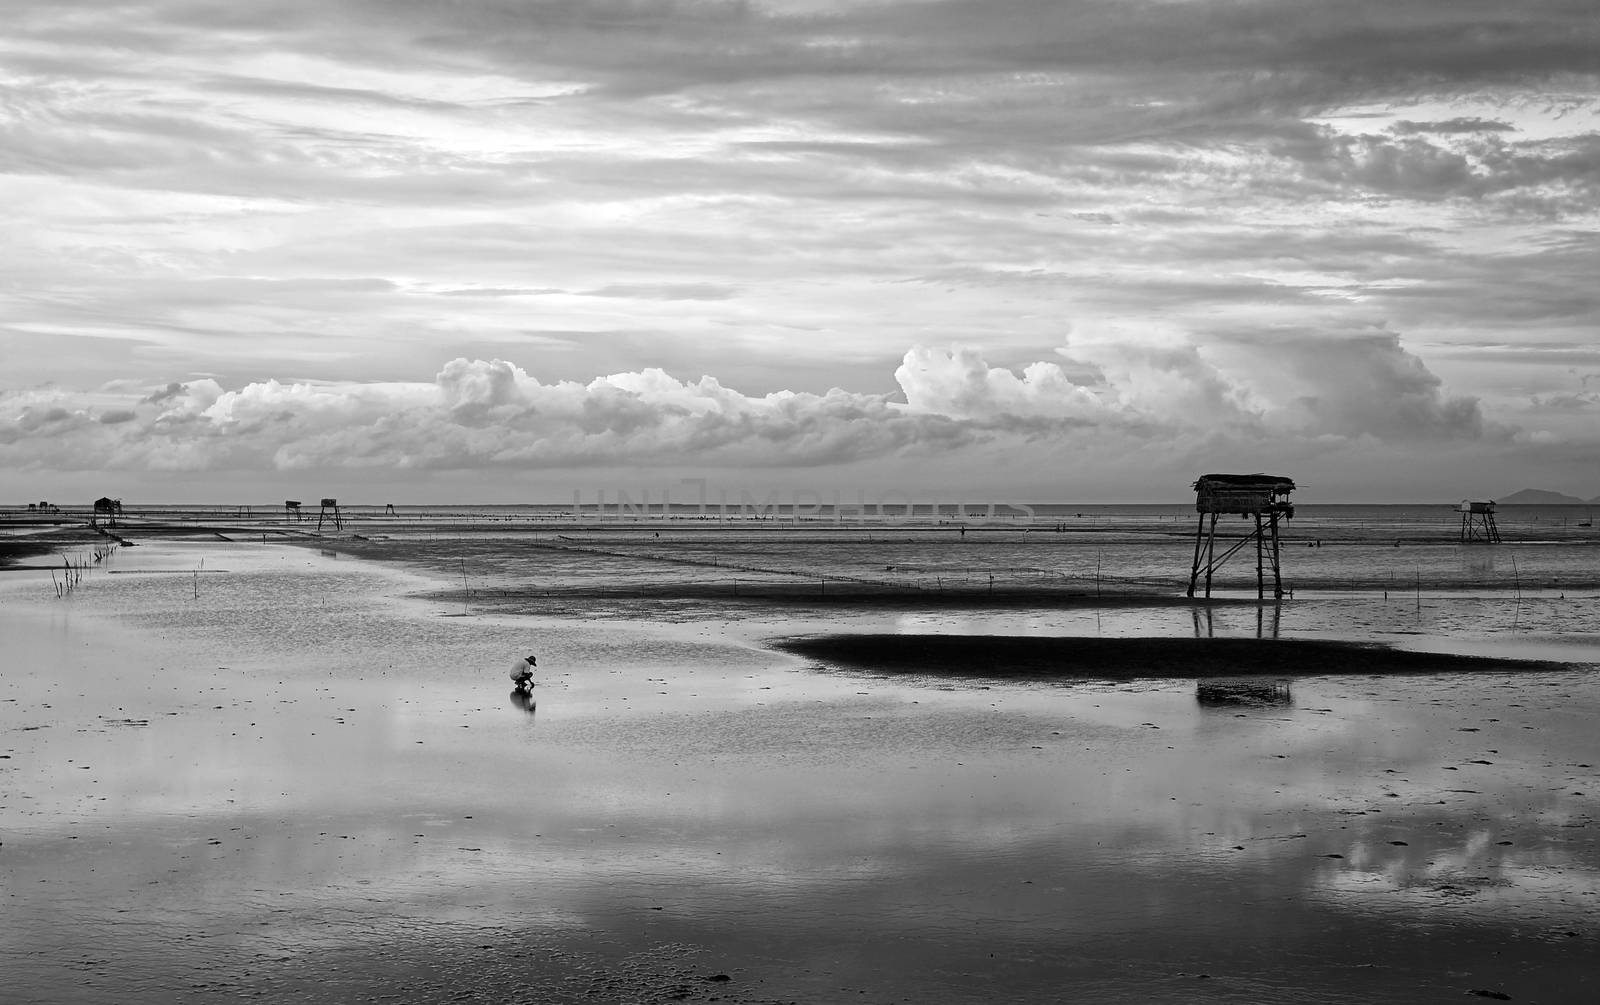 Abstract scene lonely man on Vietnam beach under cloudy sky, watch tower on black sand at Mekong Delta beach 